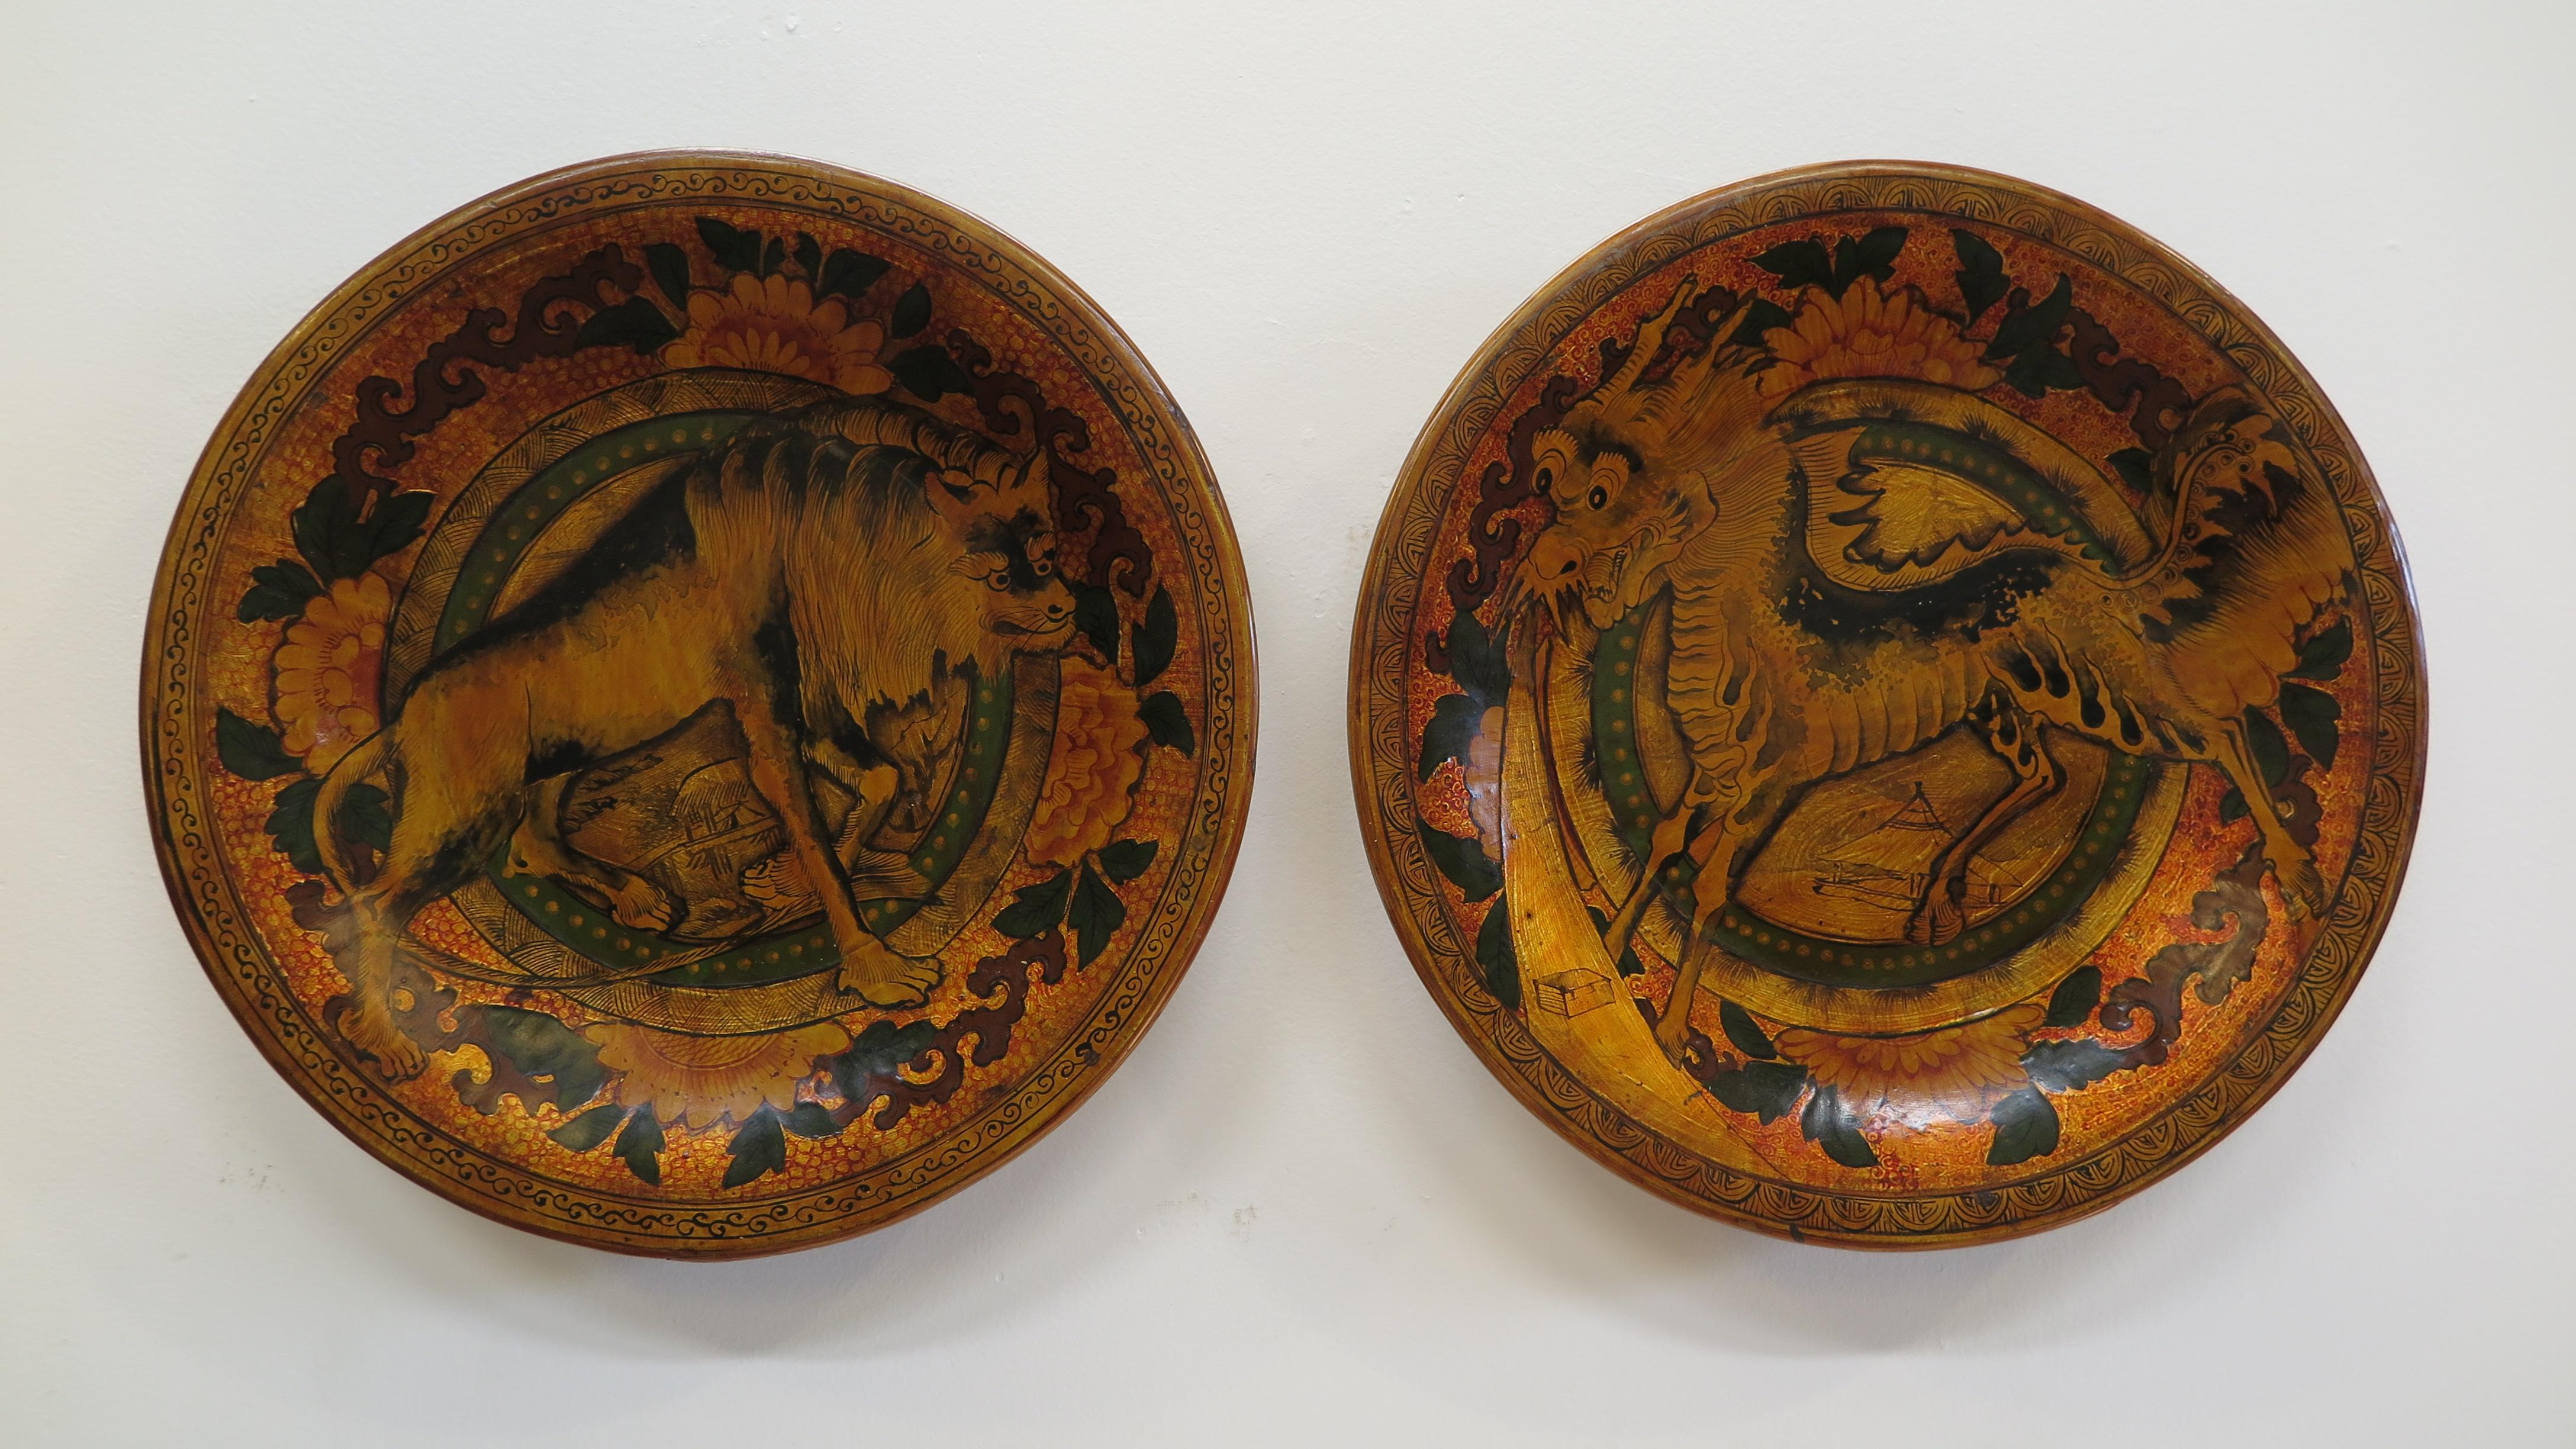 A matched set of Antique Chinese Lacquered Wooden Plates. Sculpted cut Elm wood sections joined together with wooden pins, wire banding and lacquer from the Qing Dynasty. A rare set of Antique Chinese Lacquered Plates. One plate pictures The Wolf